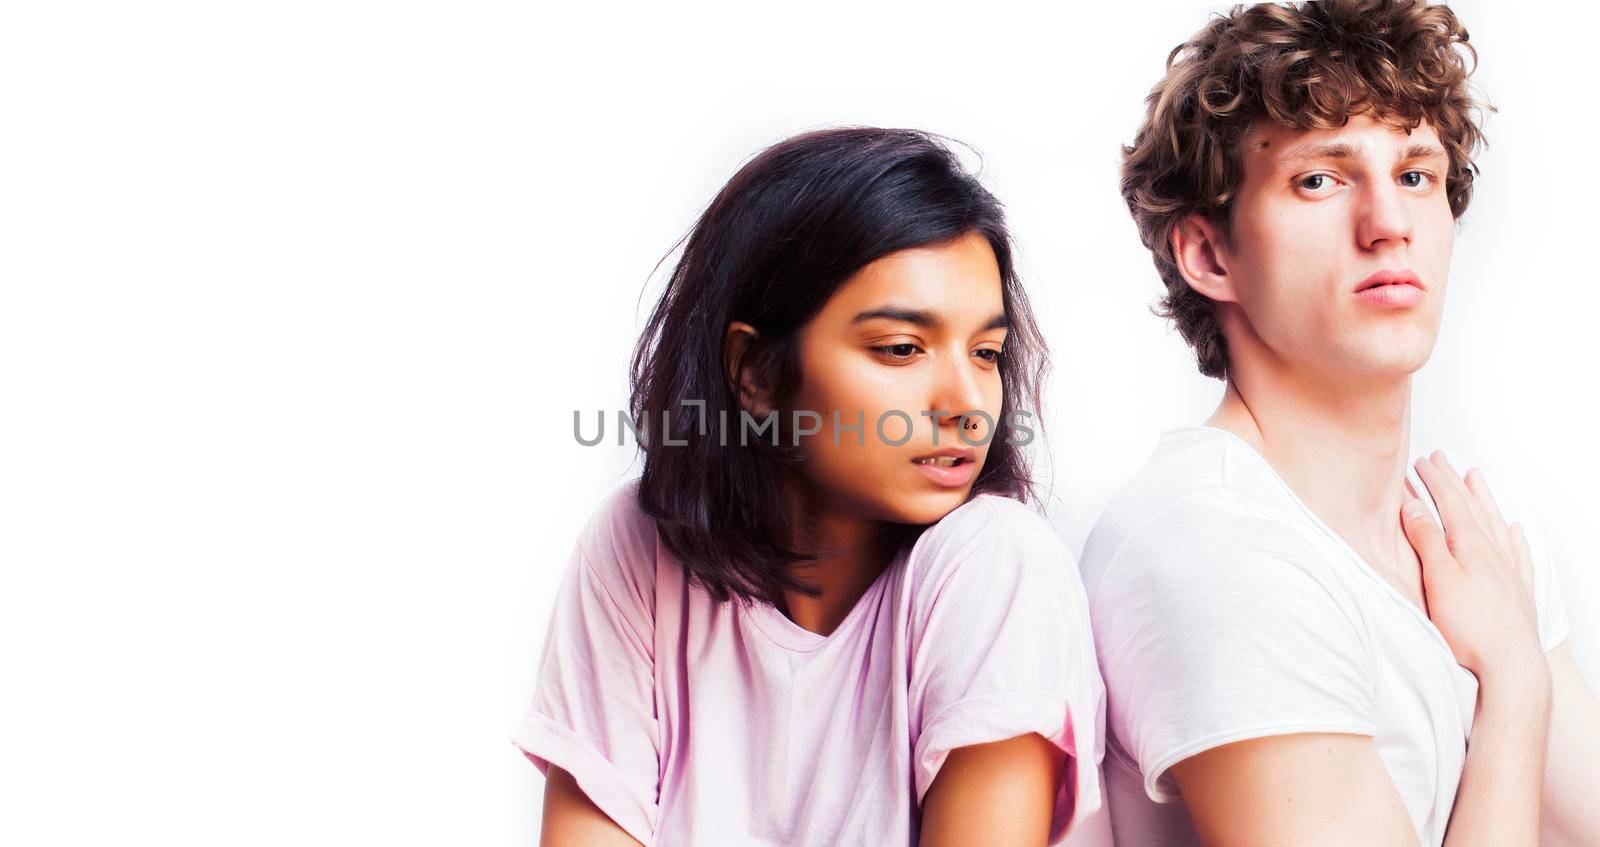 best friends teenage girl and boy together having fun, posing emotional on white background, couple happy smiling, lifestyle people concept, blond and brunette multi nations by JordanJ